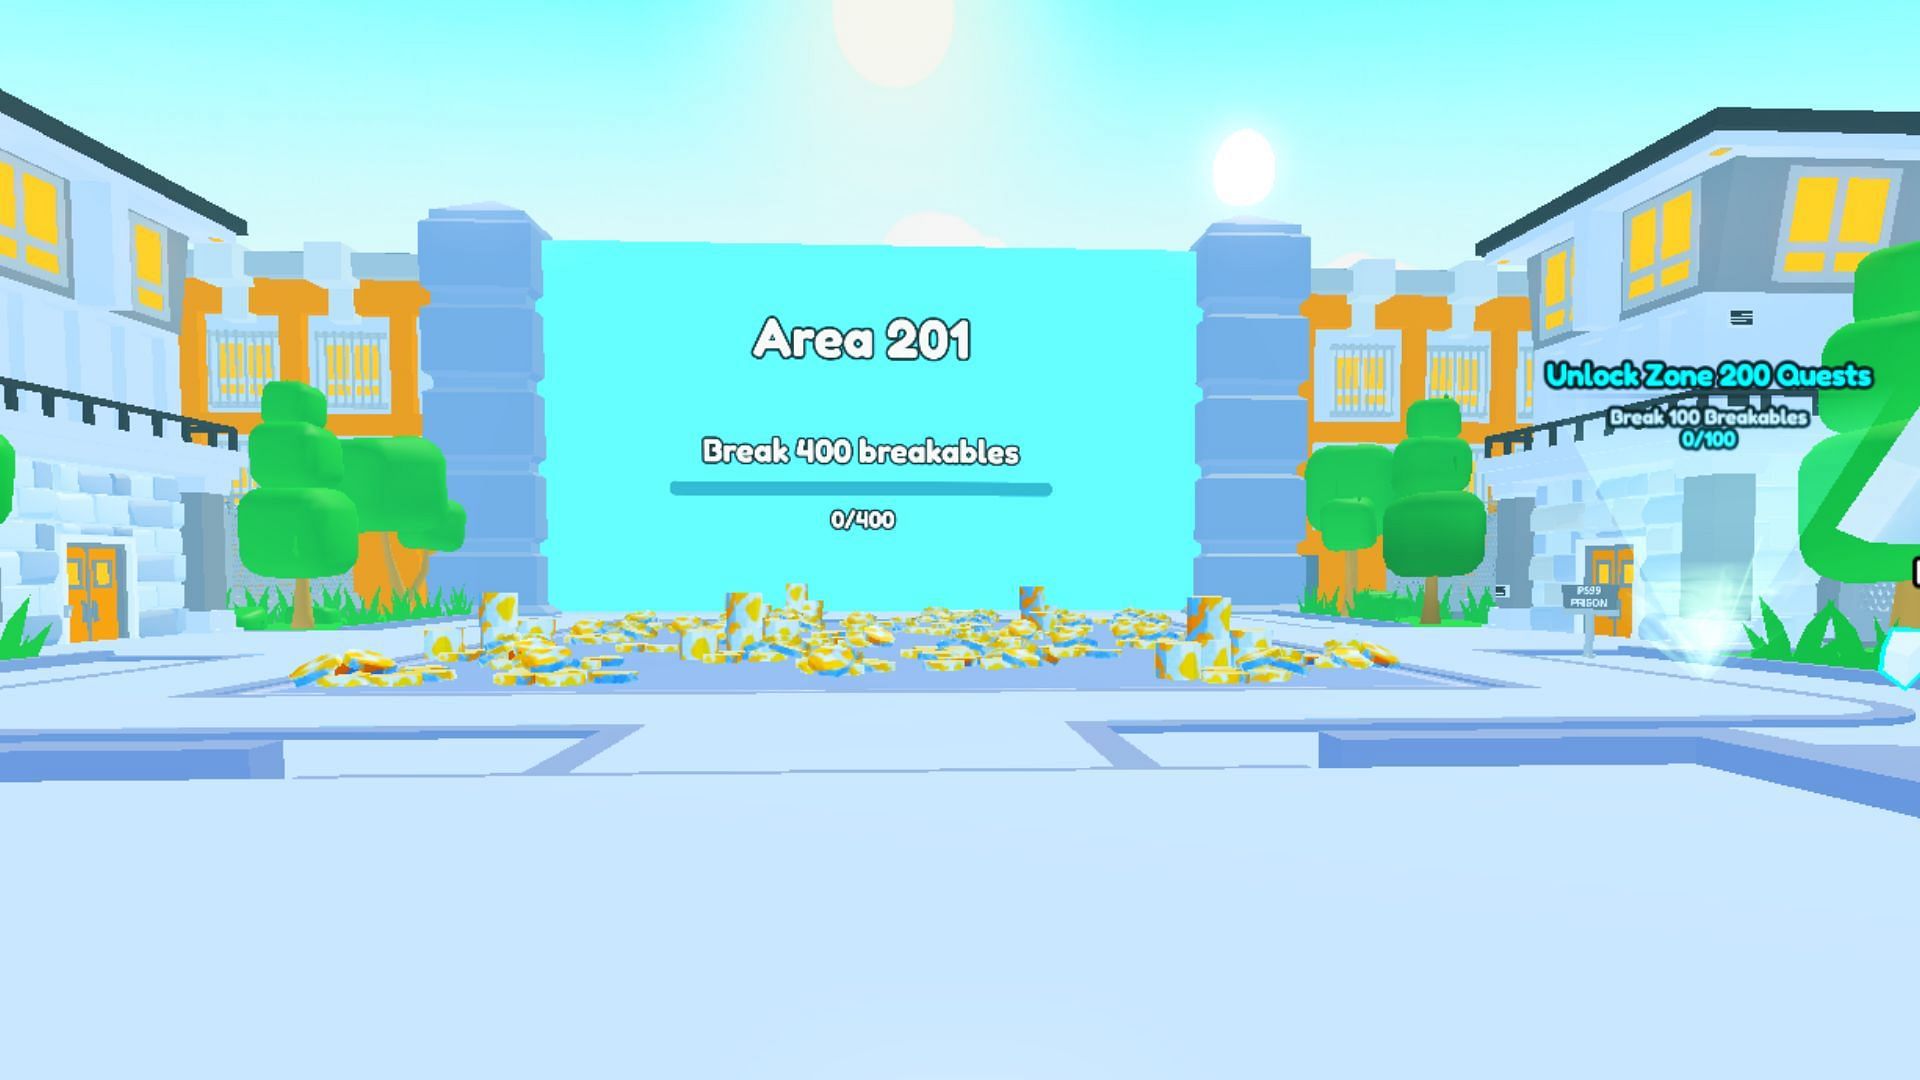 Finish quests to unlock the Area 201 (Image via Roblox)